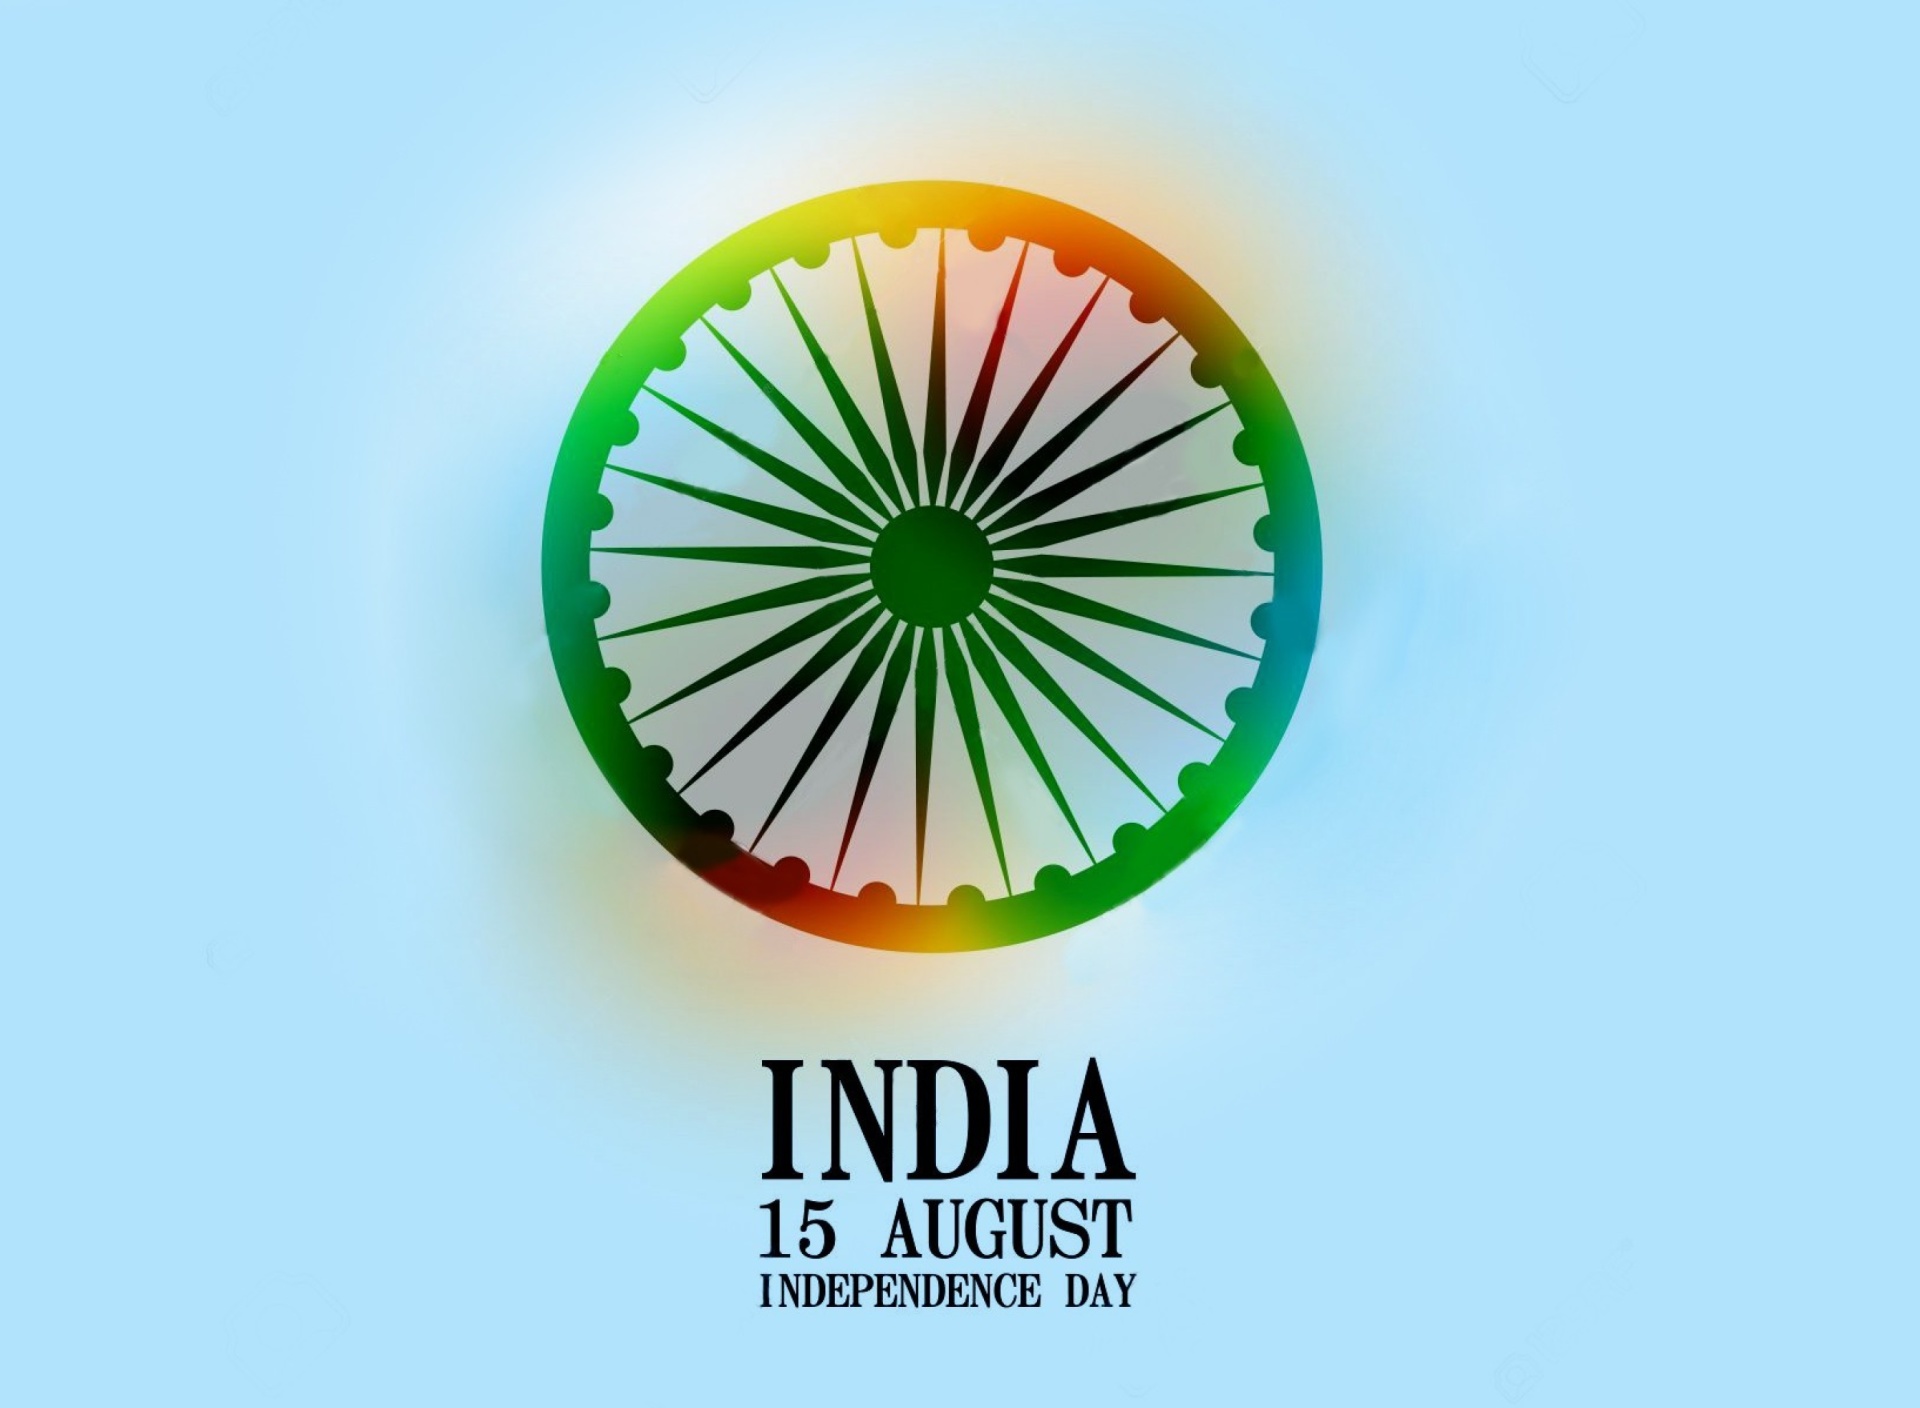 India Independence Day 15 August screenshot #1 1920x1408